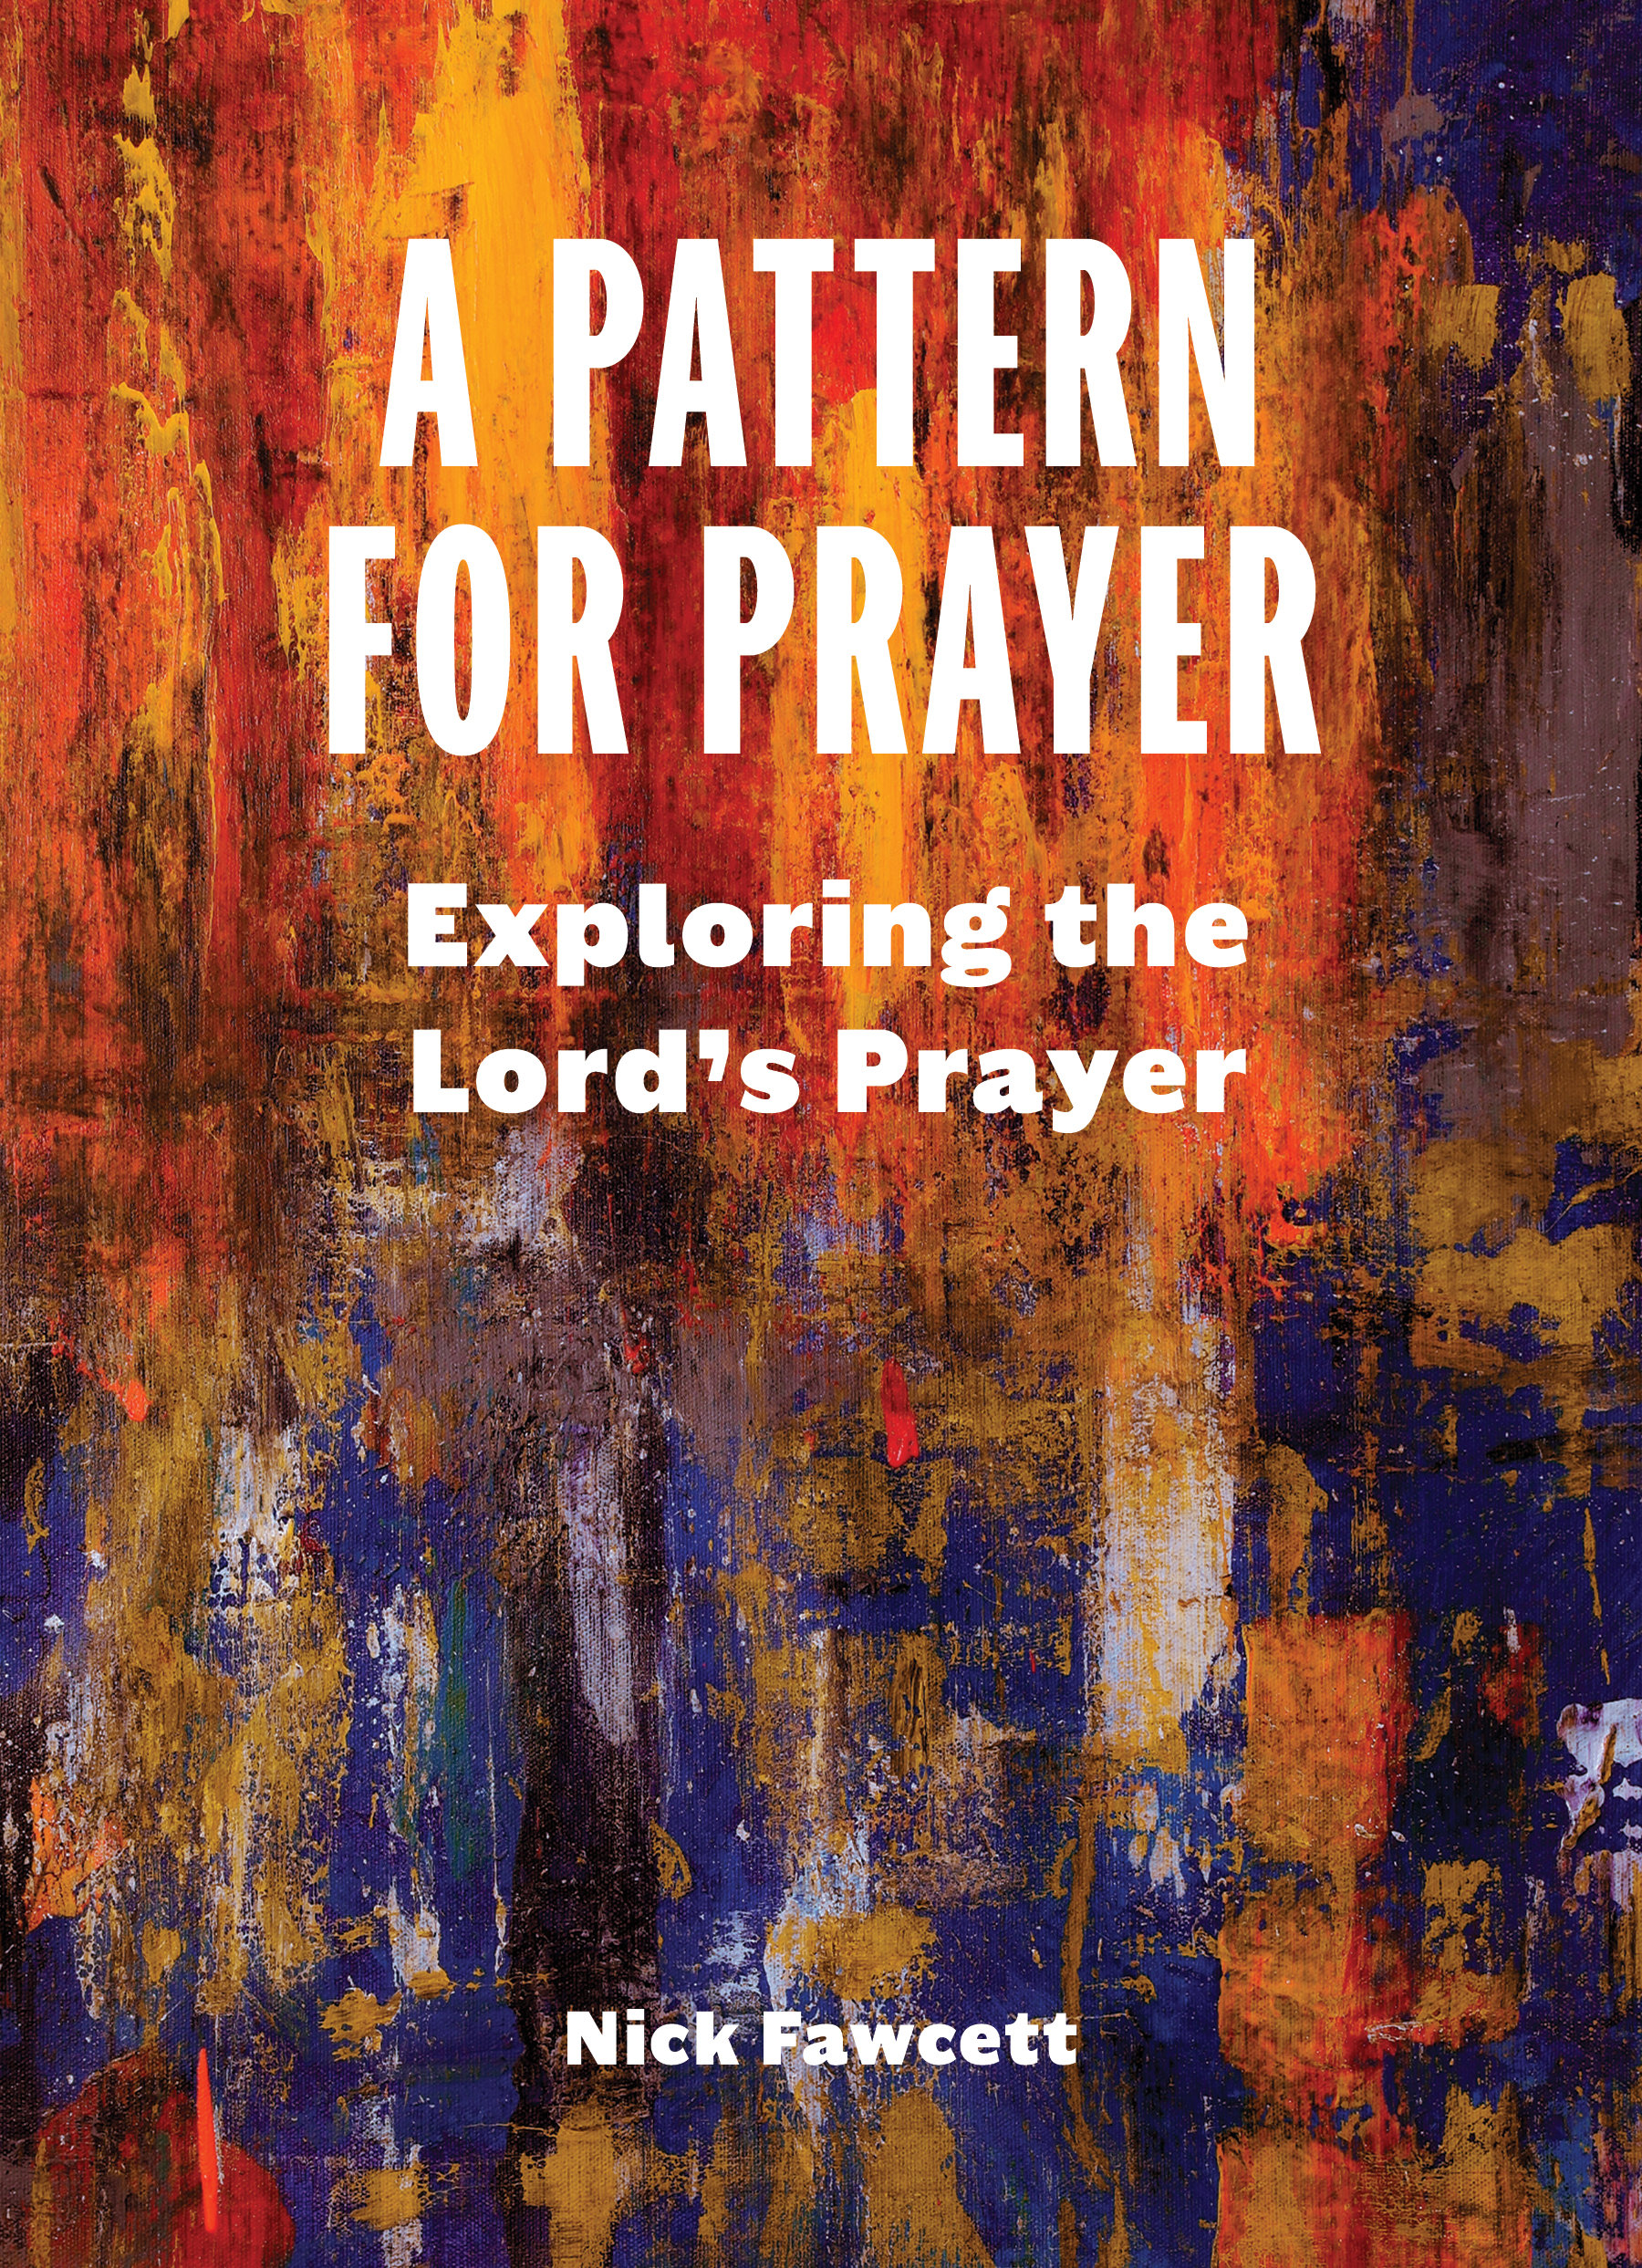 A Pattern for Prayer: Exploring the Lord's Prayer